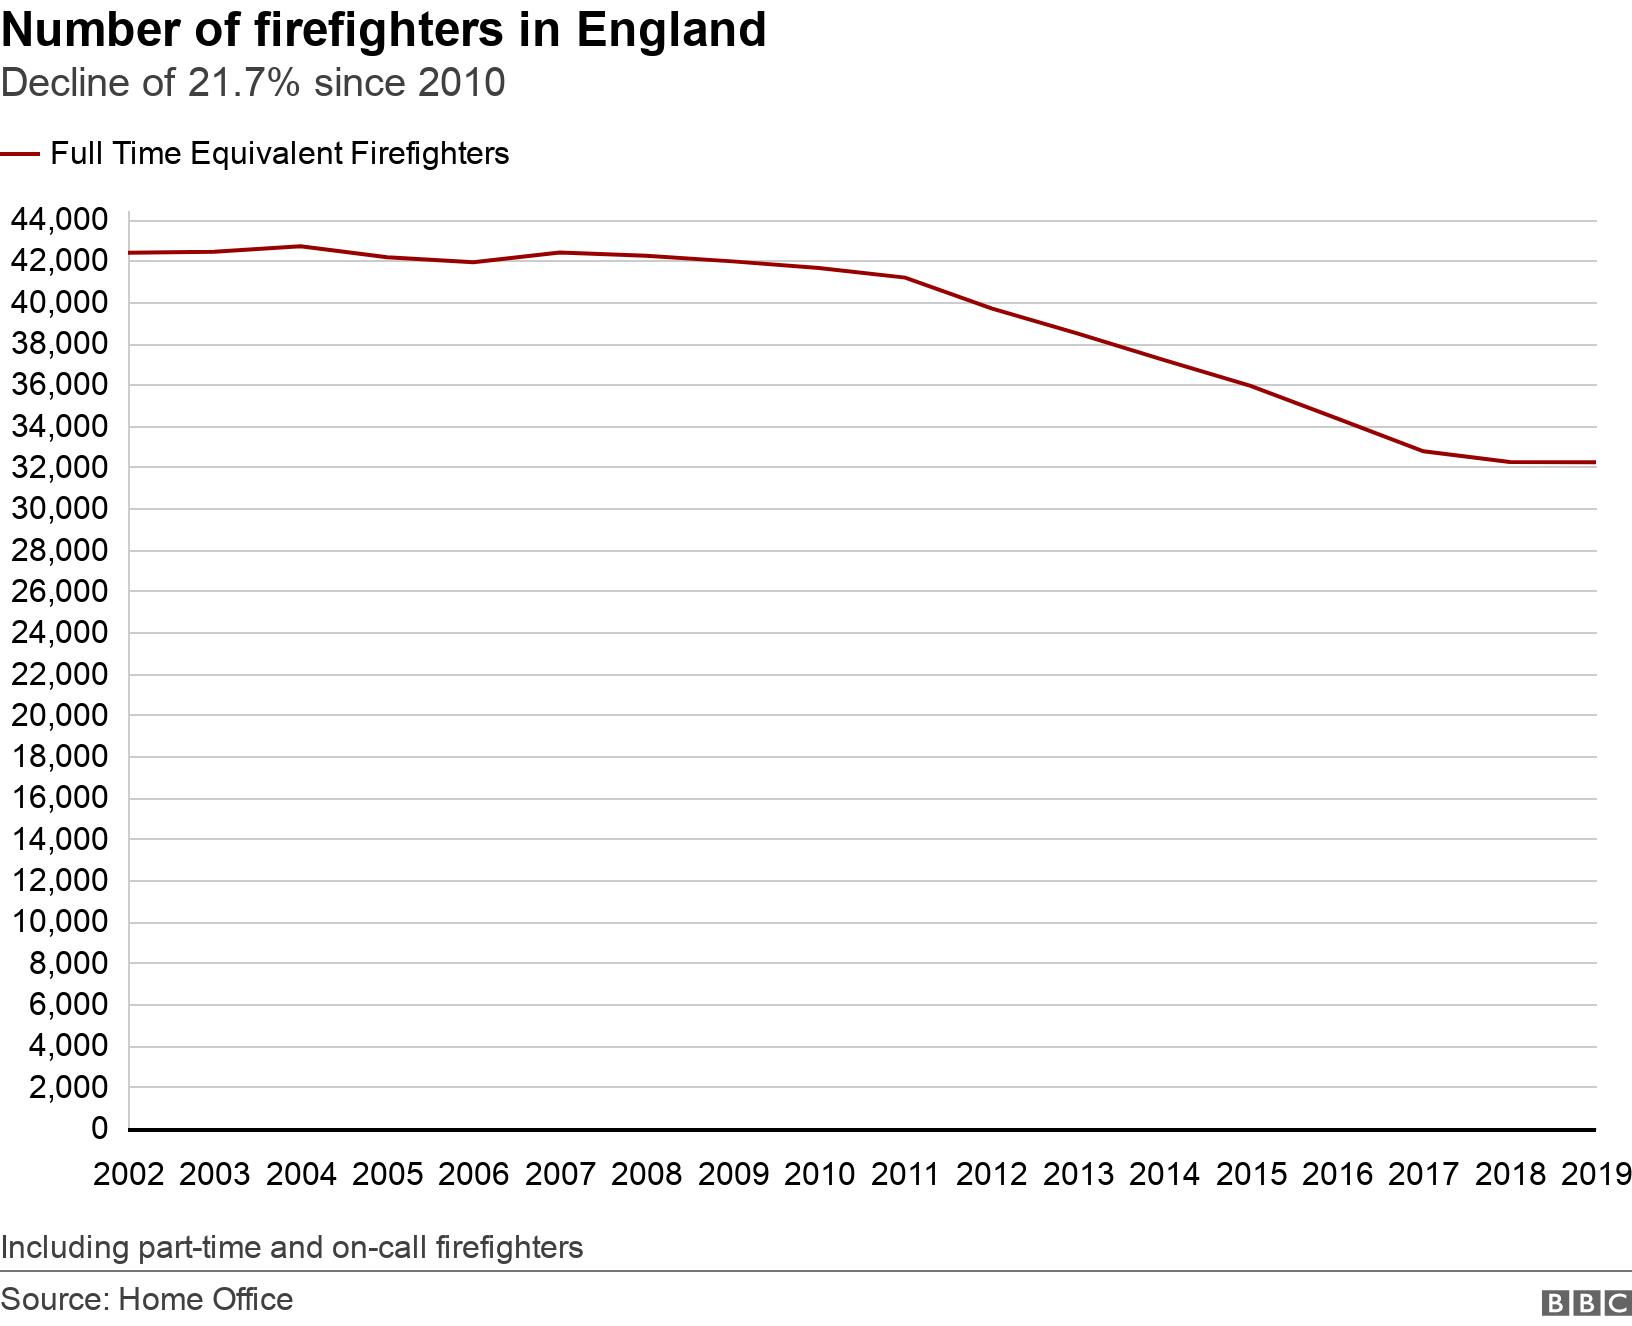 Number of firefighters in England. Decline of 21.7% since 2010.  Including part-time and on-call firefighters.